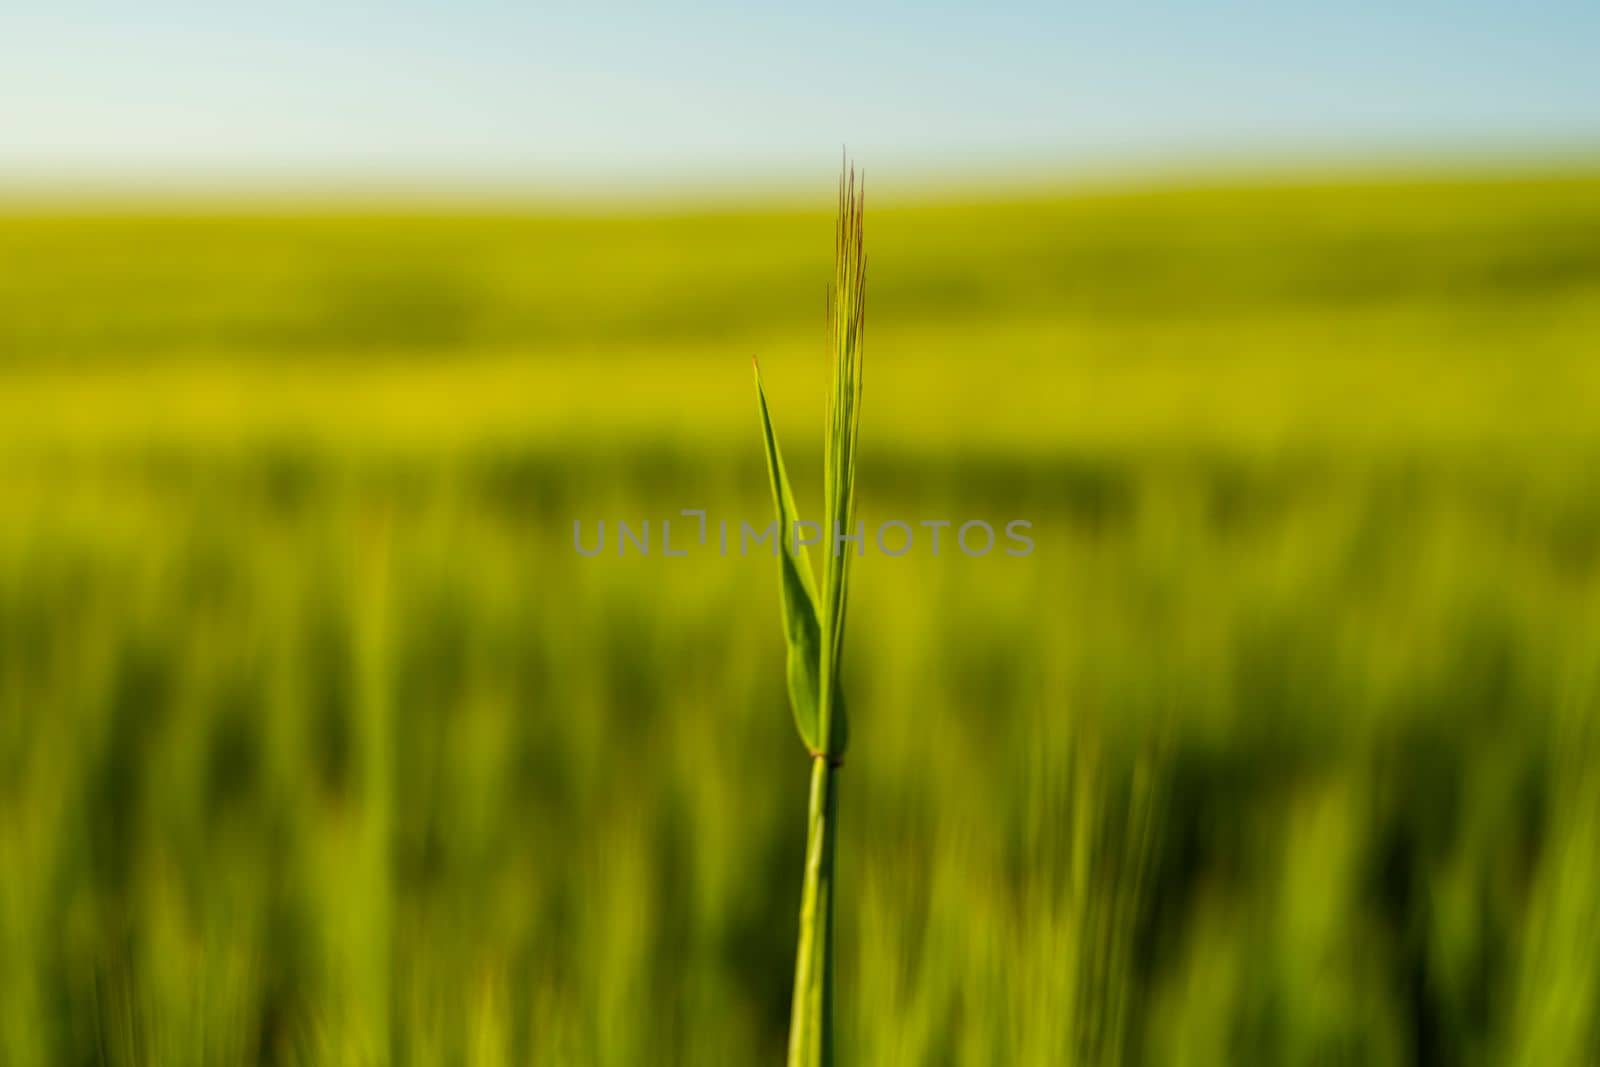 Green barley ear with a agricultural field on background, rural landscape. Green unripe cereals. The concept of agriculture, healthy eating, organic food. by vovsht